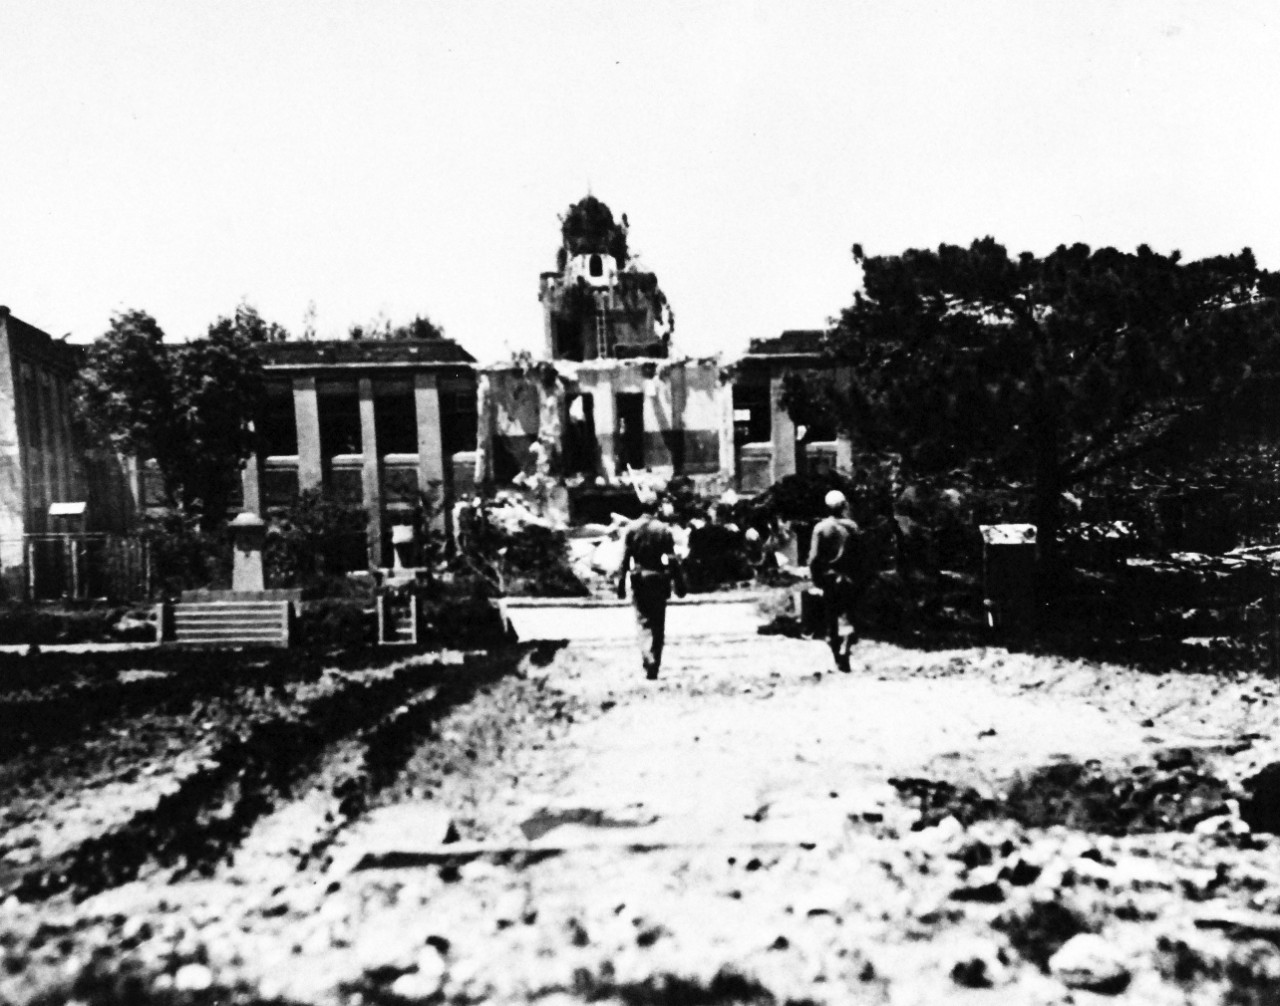 80-G-322706: Okinawa Campaign, April-June 1945.   Two First Division Marines walk along a rubble strewn road towards the ruins of the Japanese Naval Academy on Okinawa, Ryukyus Islands. The building was wrecked during pre-invasion bombardment, released April 22, 1945.  Official U.S. Navy photograph, now in the collections of the National Archives.  (2016/04/26).  